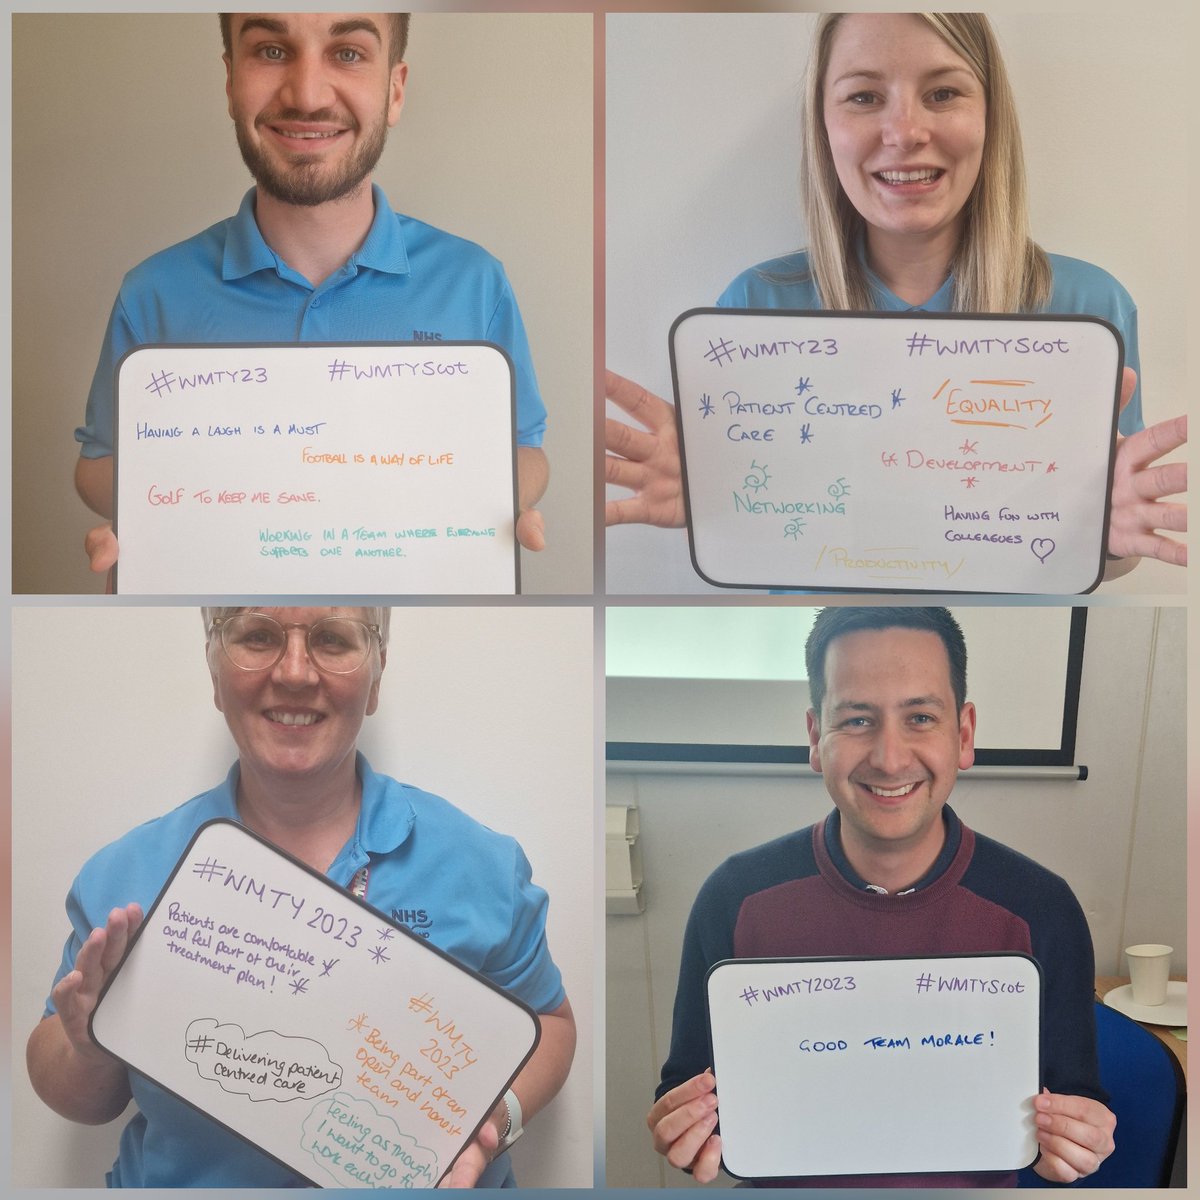 WHAT MATTERS TO YOU 2023 @nhsggcpodiatry. 
Lewis, Kirsty, Christine and James tell us from their perspectives. #staffWMTY #WMTY23 @WMTYScot @NHSGGC